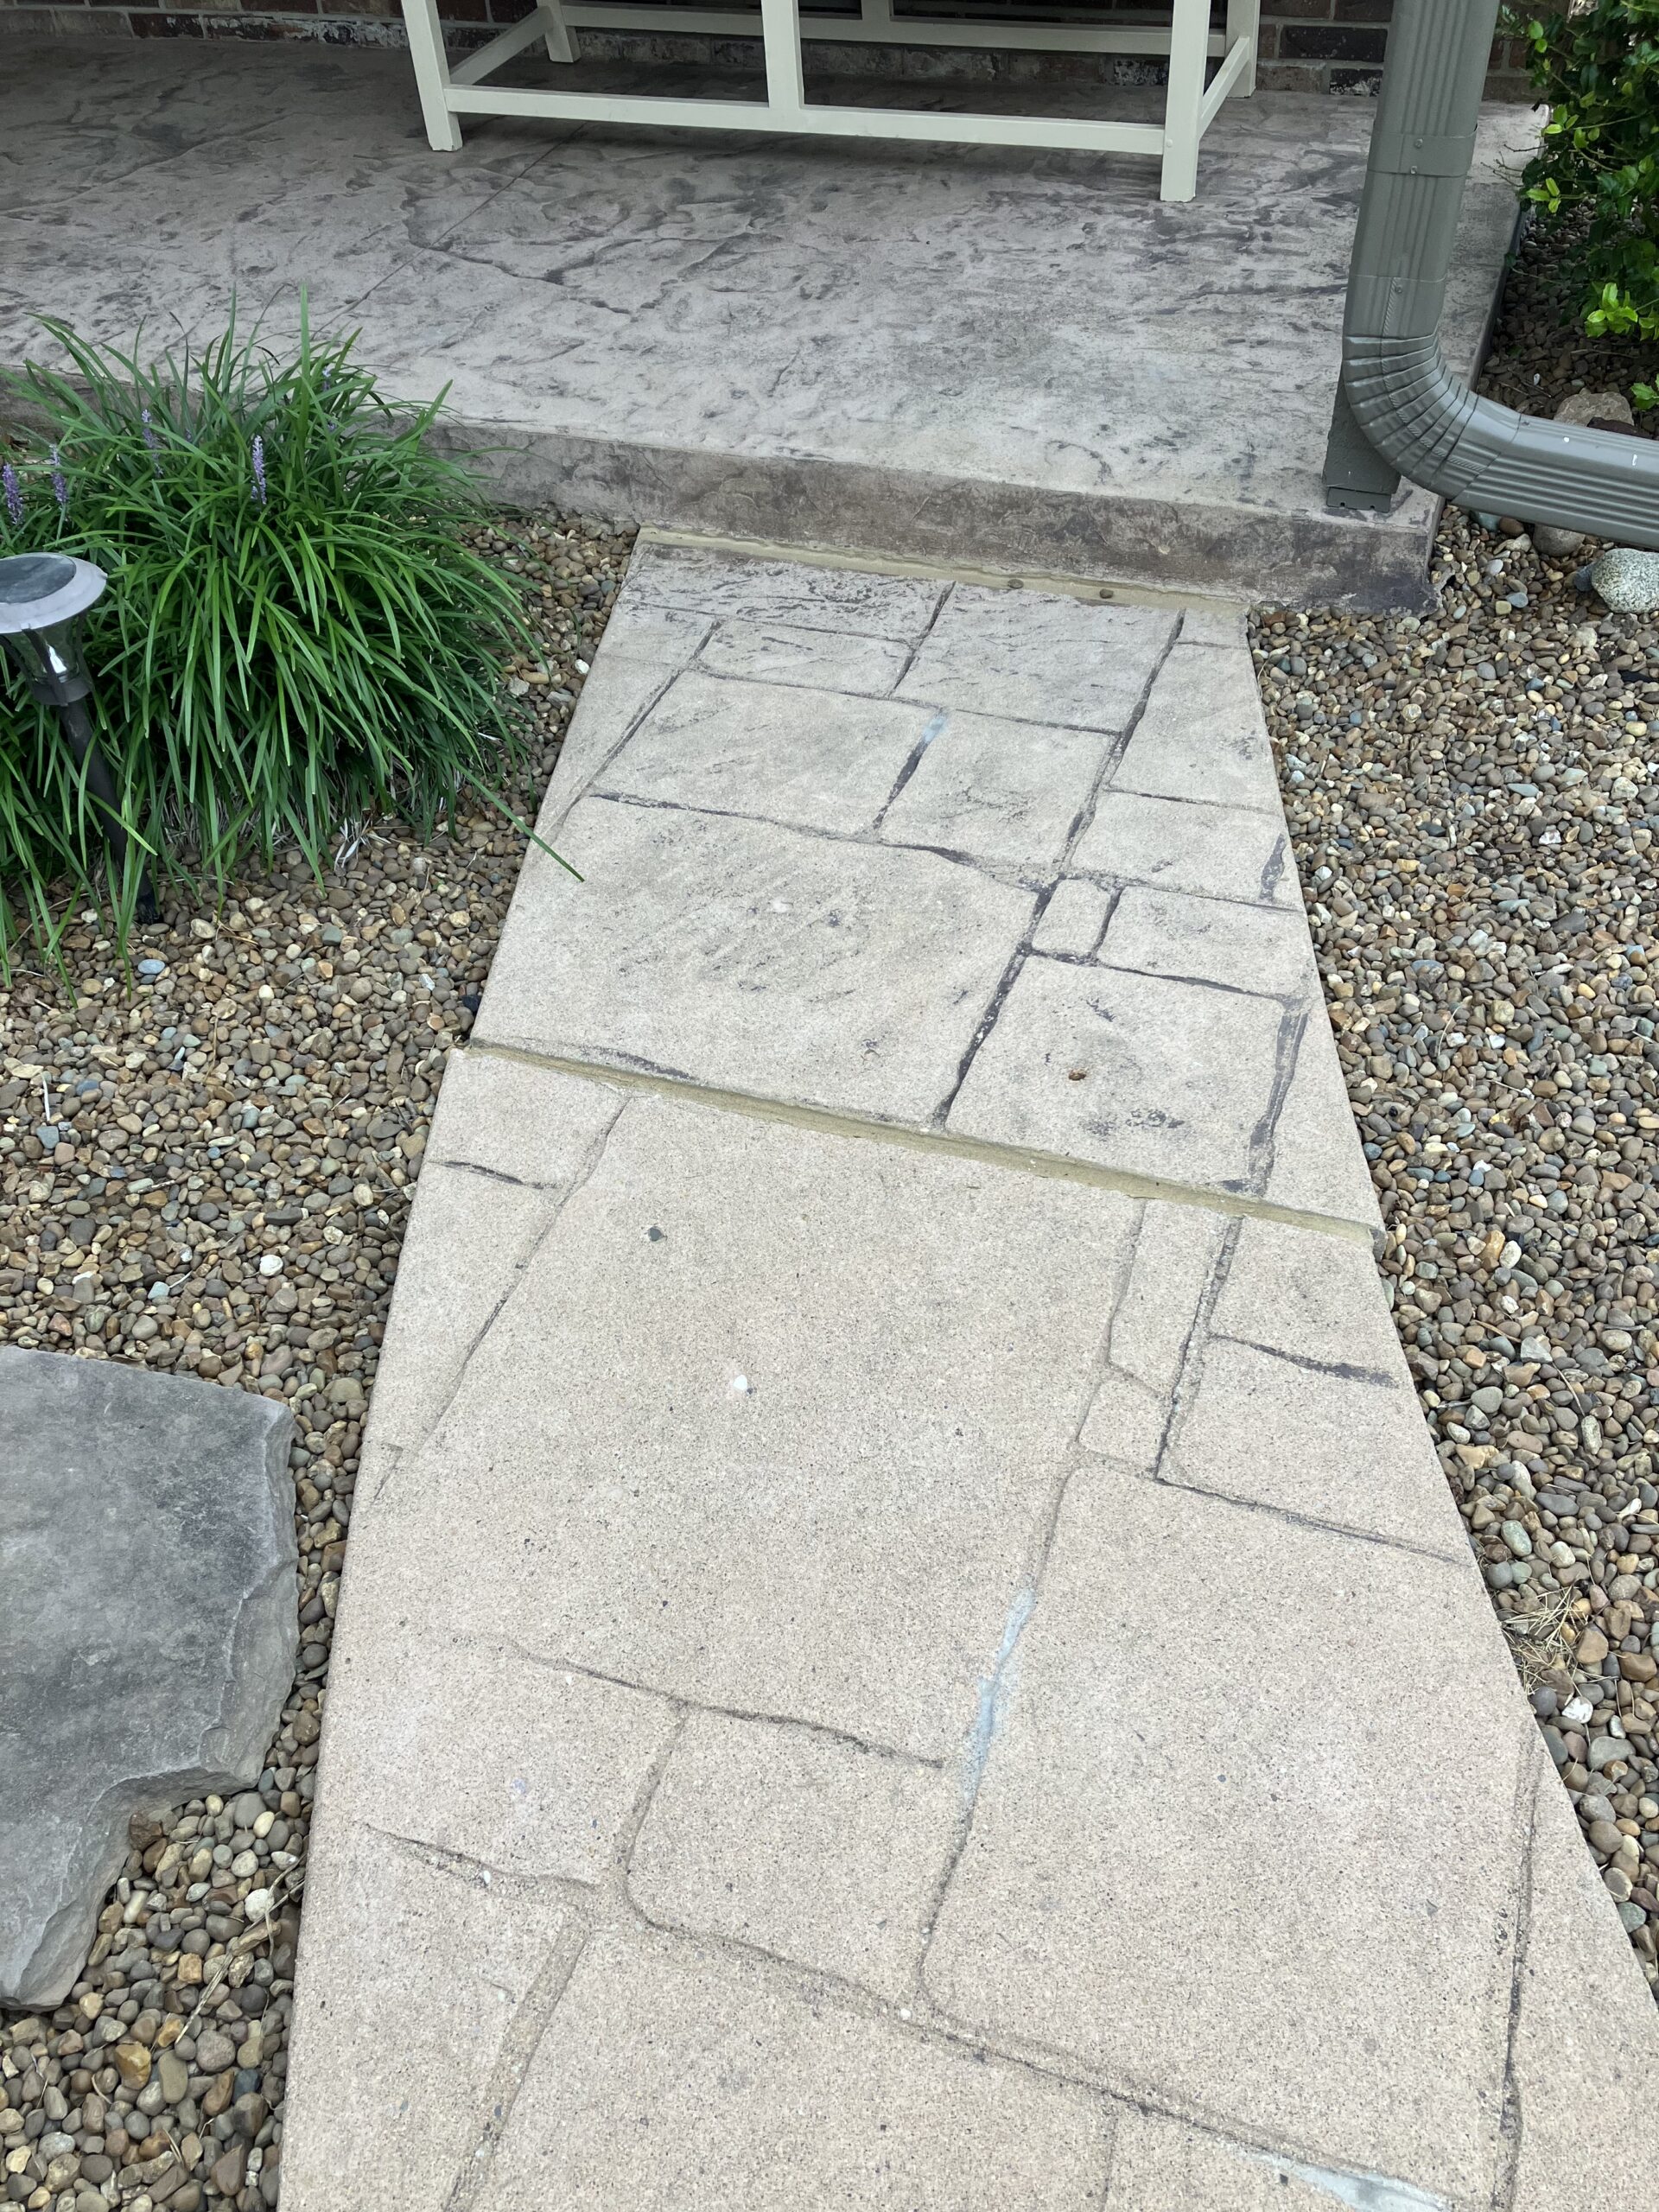 Unstained, faded stamped concrete sidewalk before restoration